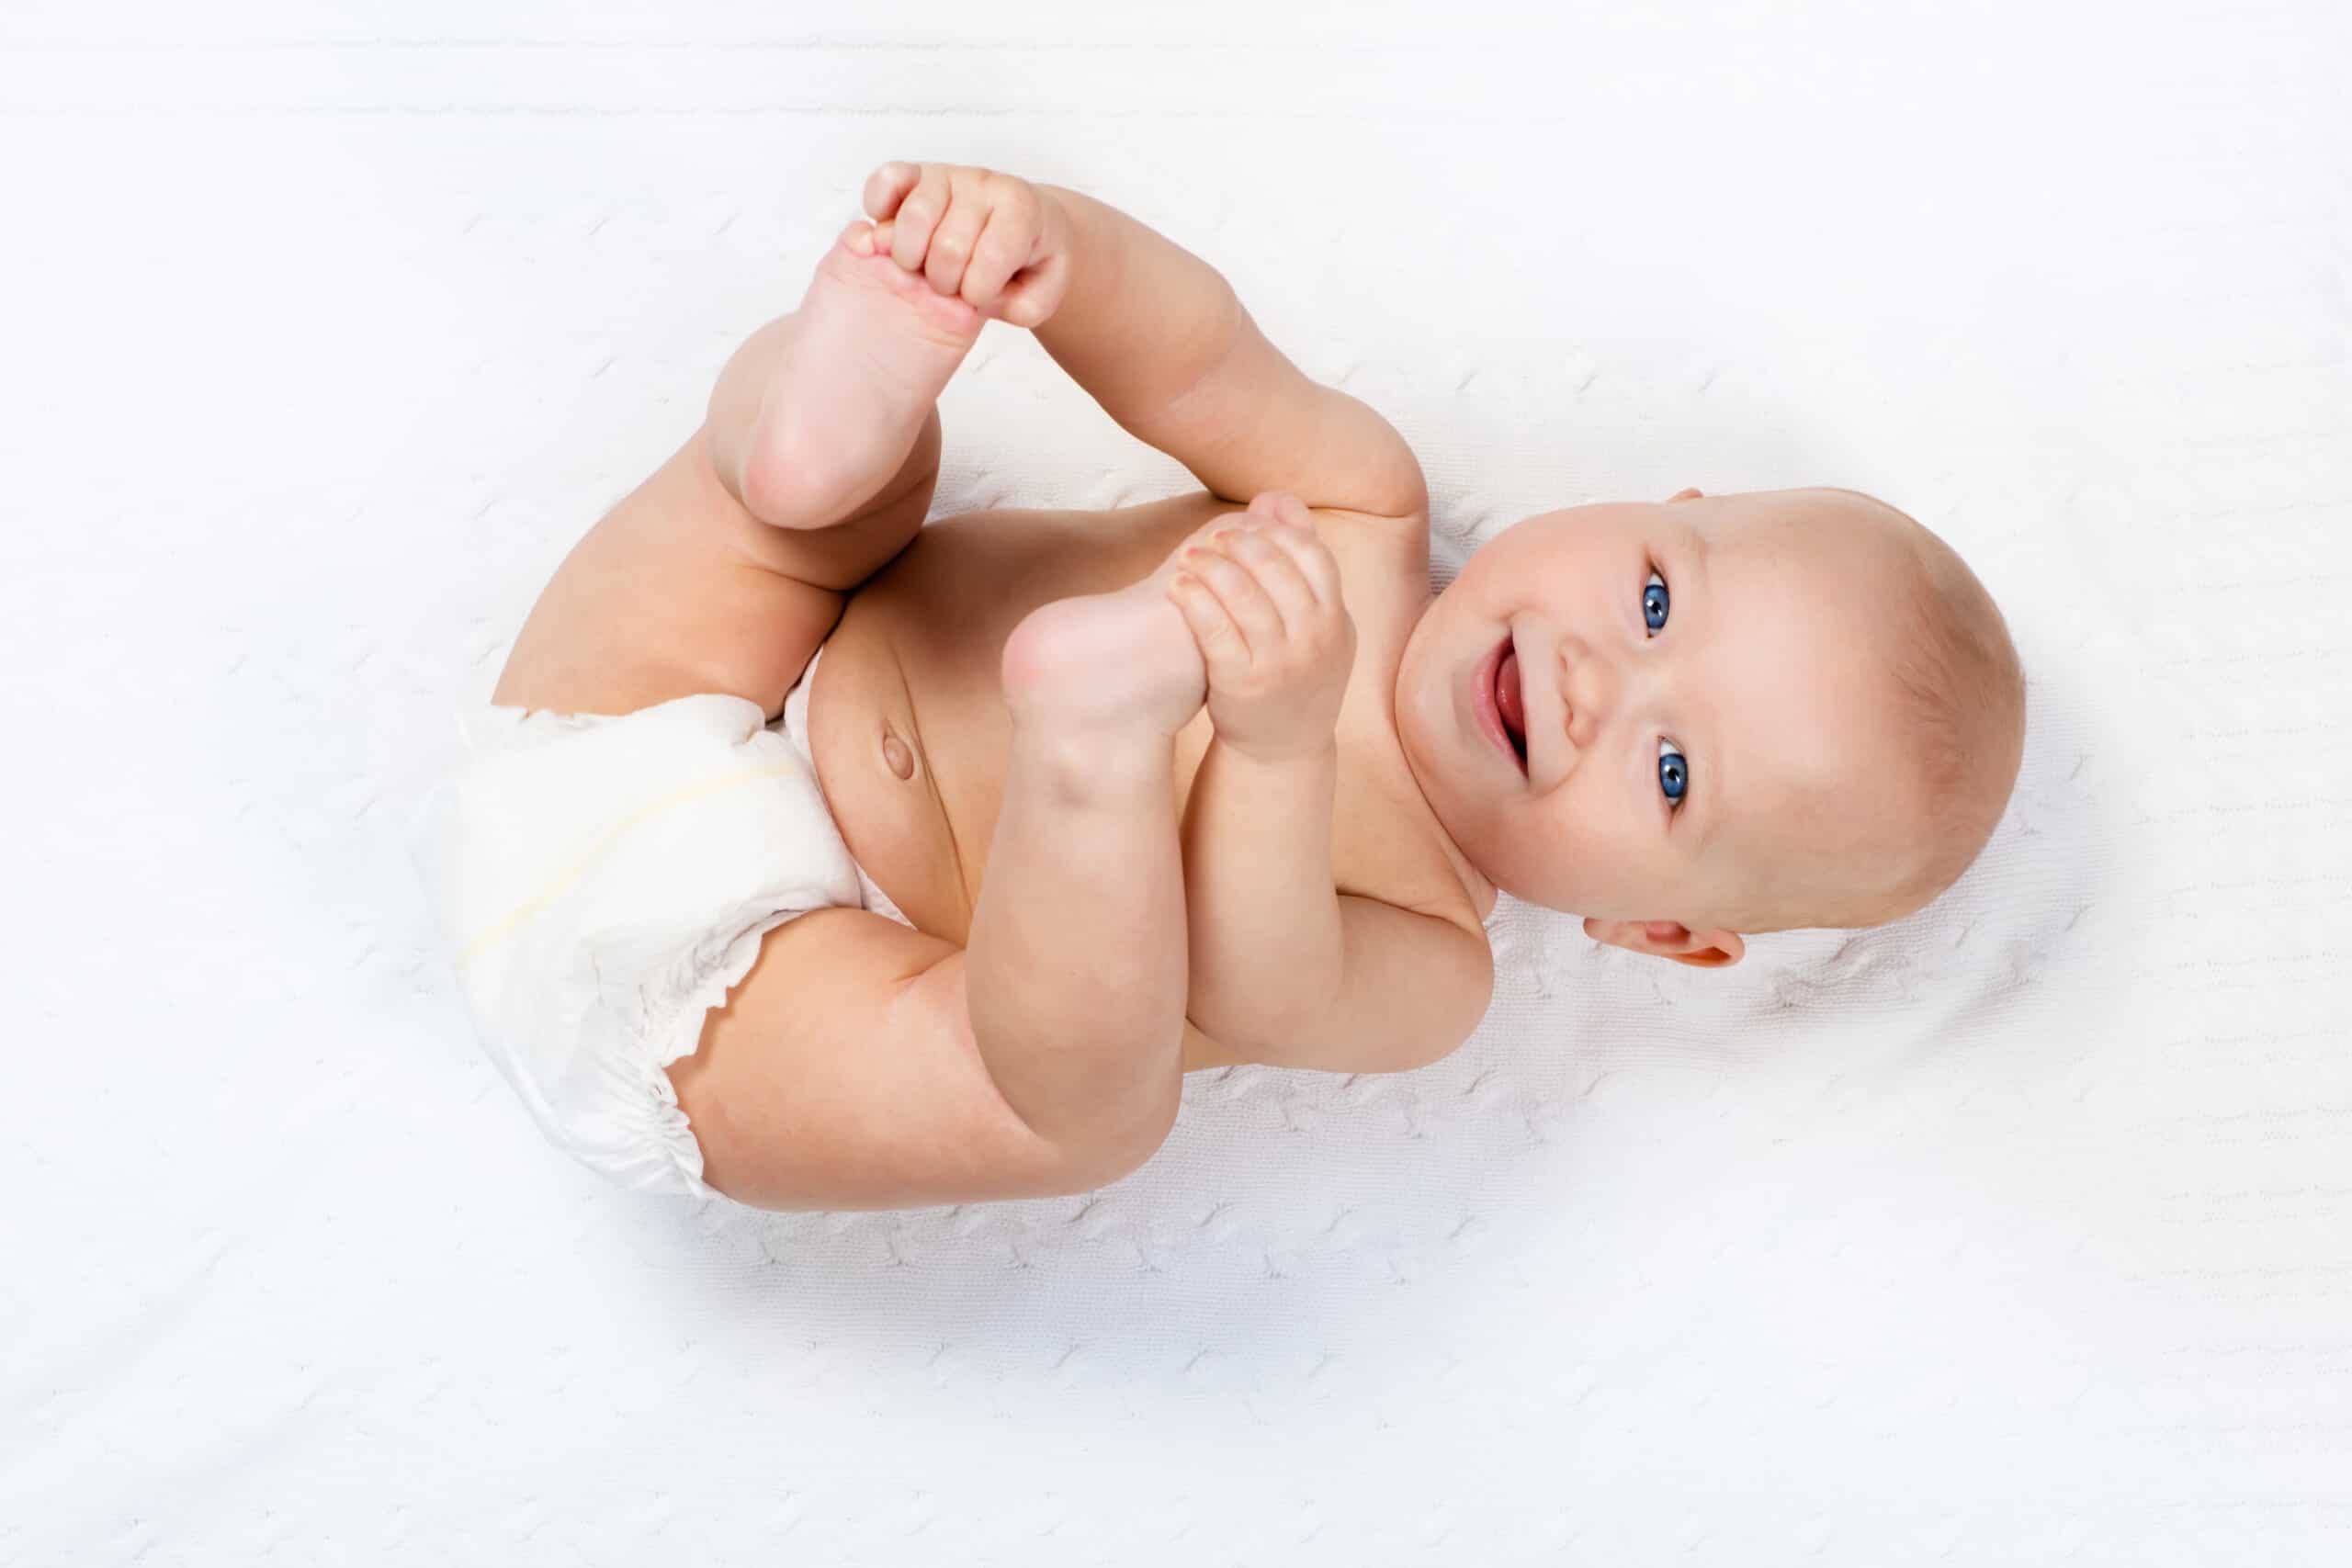 Funny little baby wearing a diaper playing on a white knitted blanket in a sunny nursery.